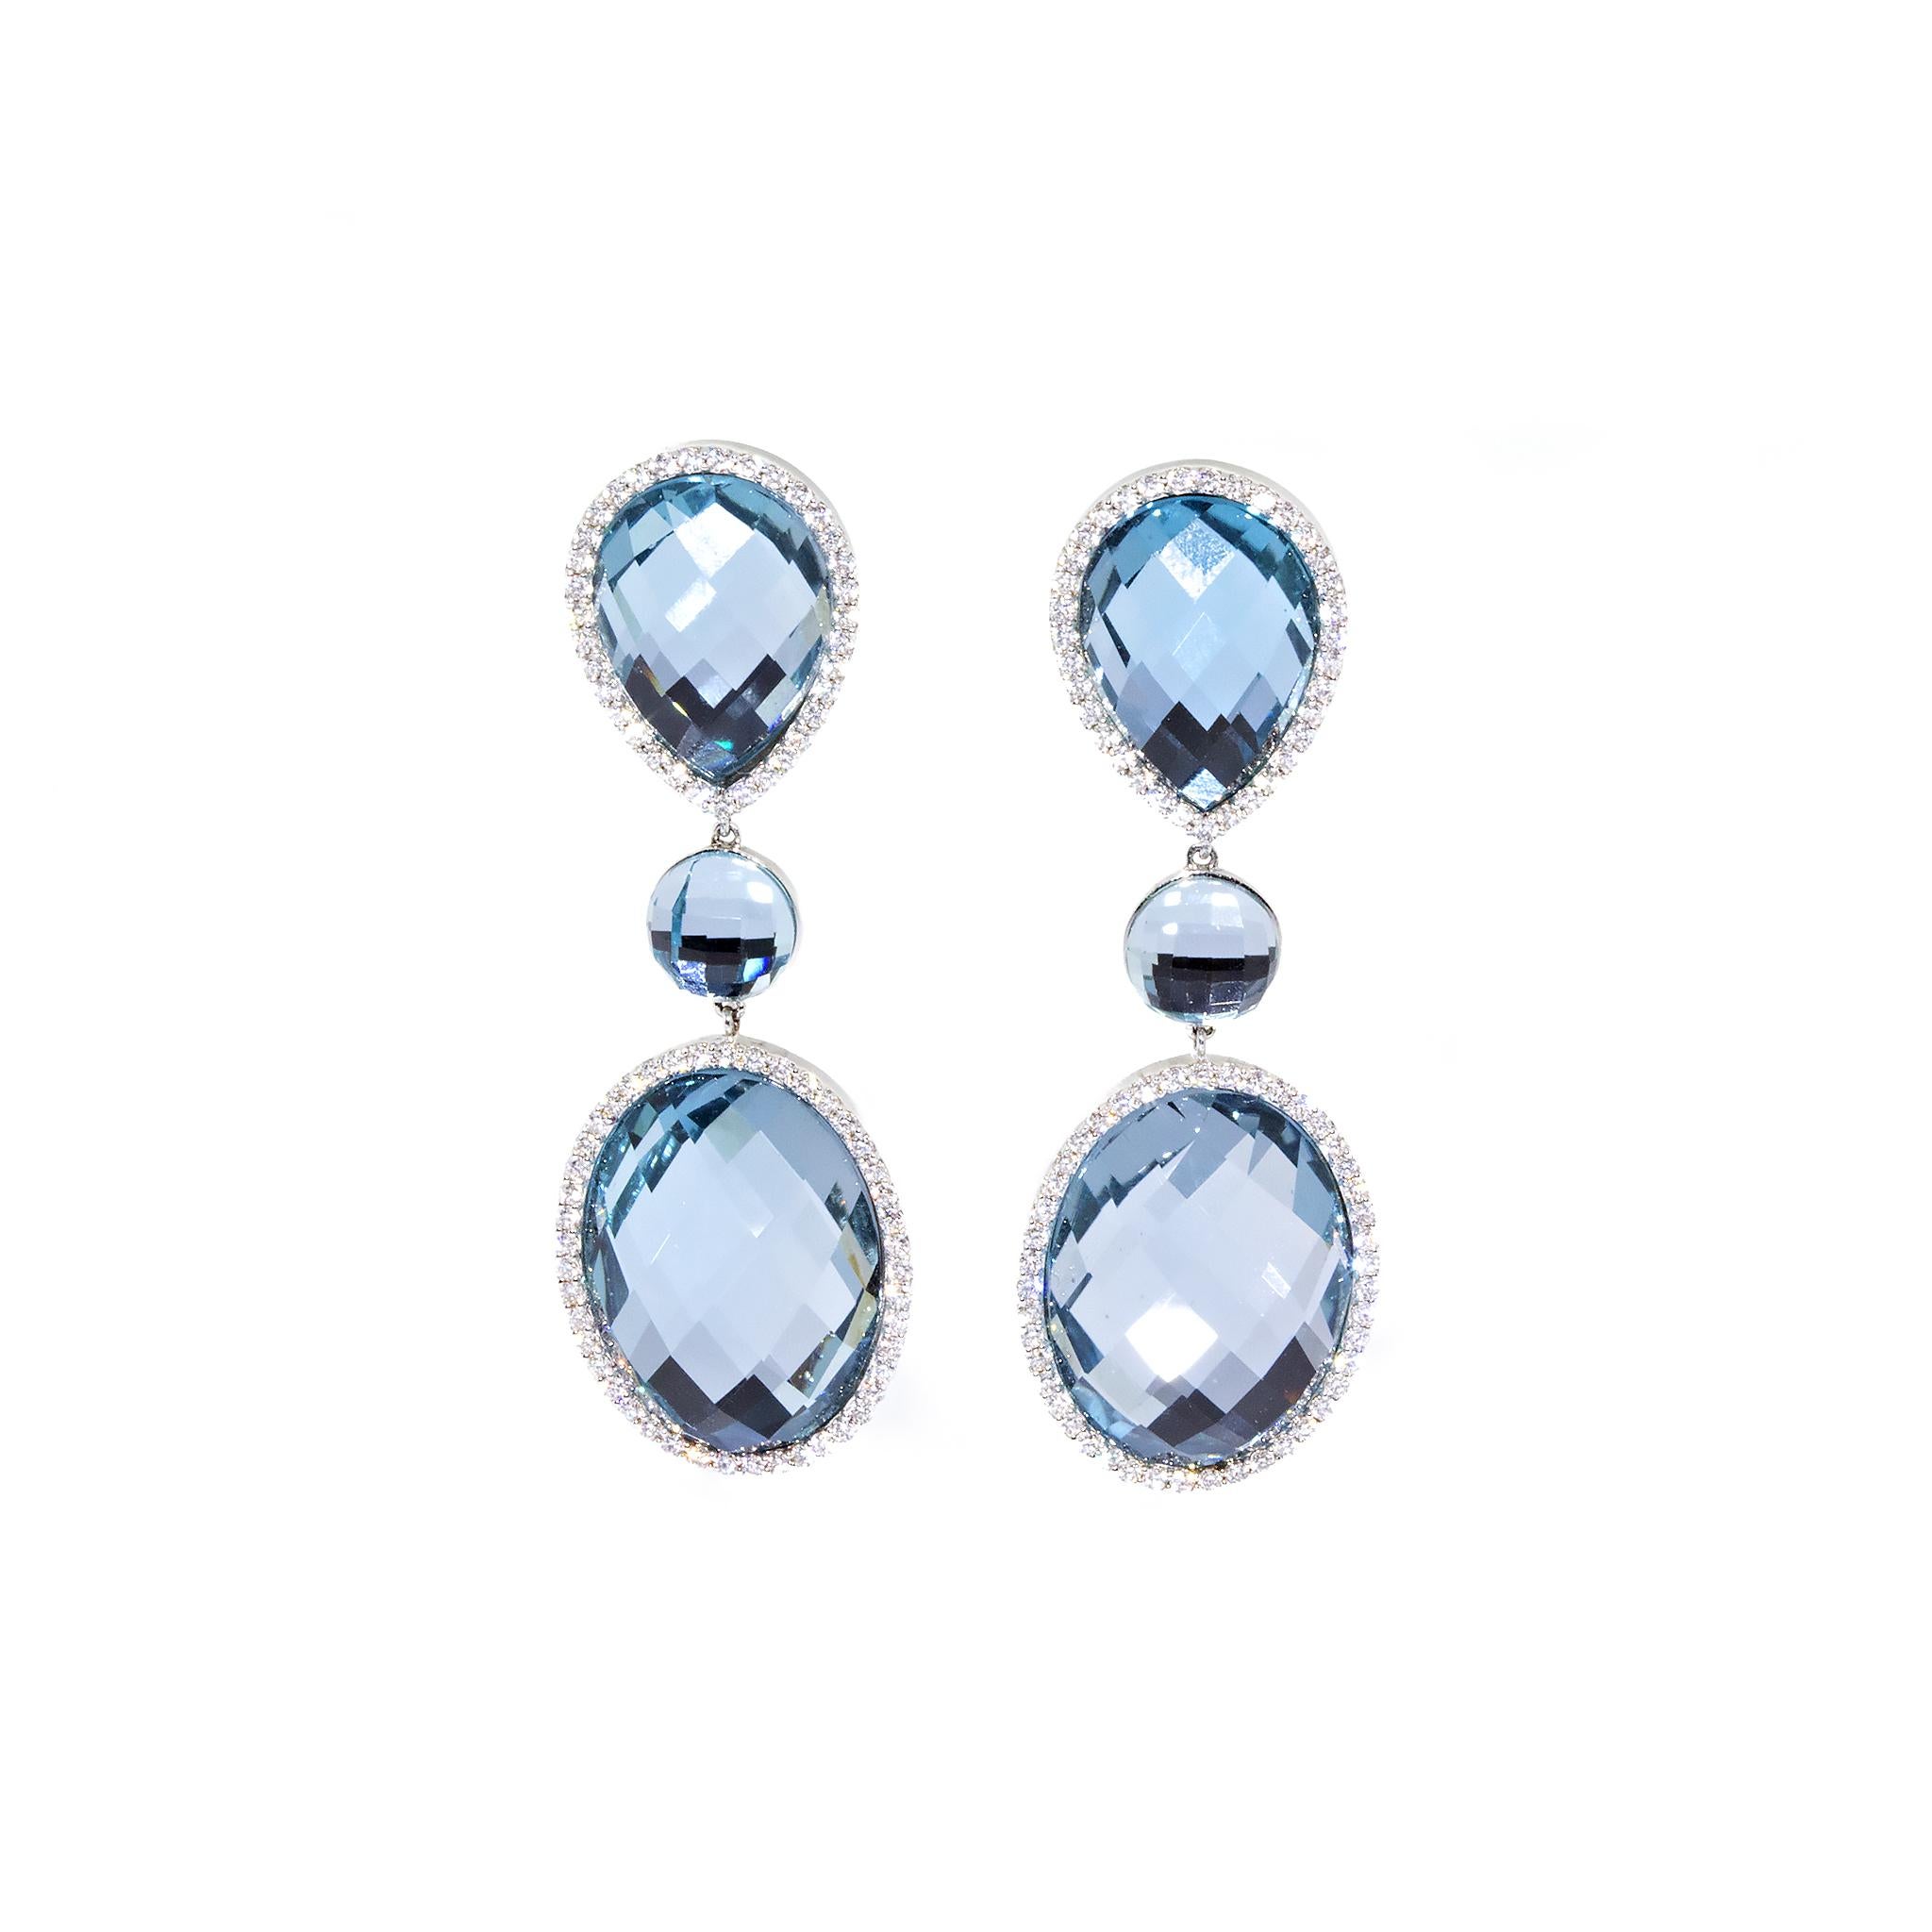 Oval Cut Roberto Coin 18k White Gold Topaz and Diamond Hanging Earrings